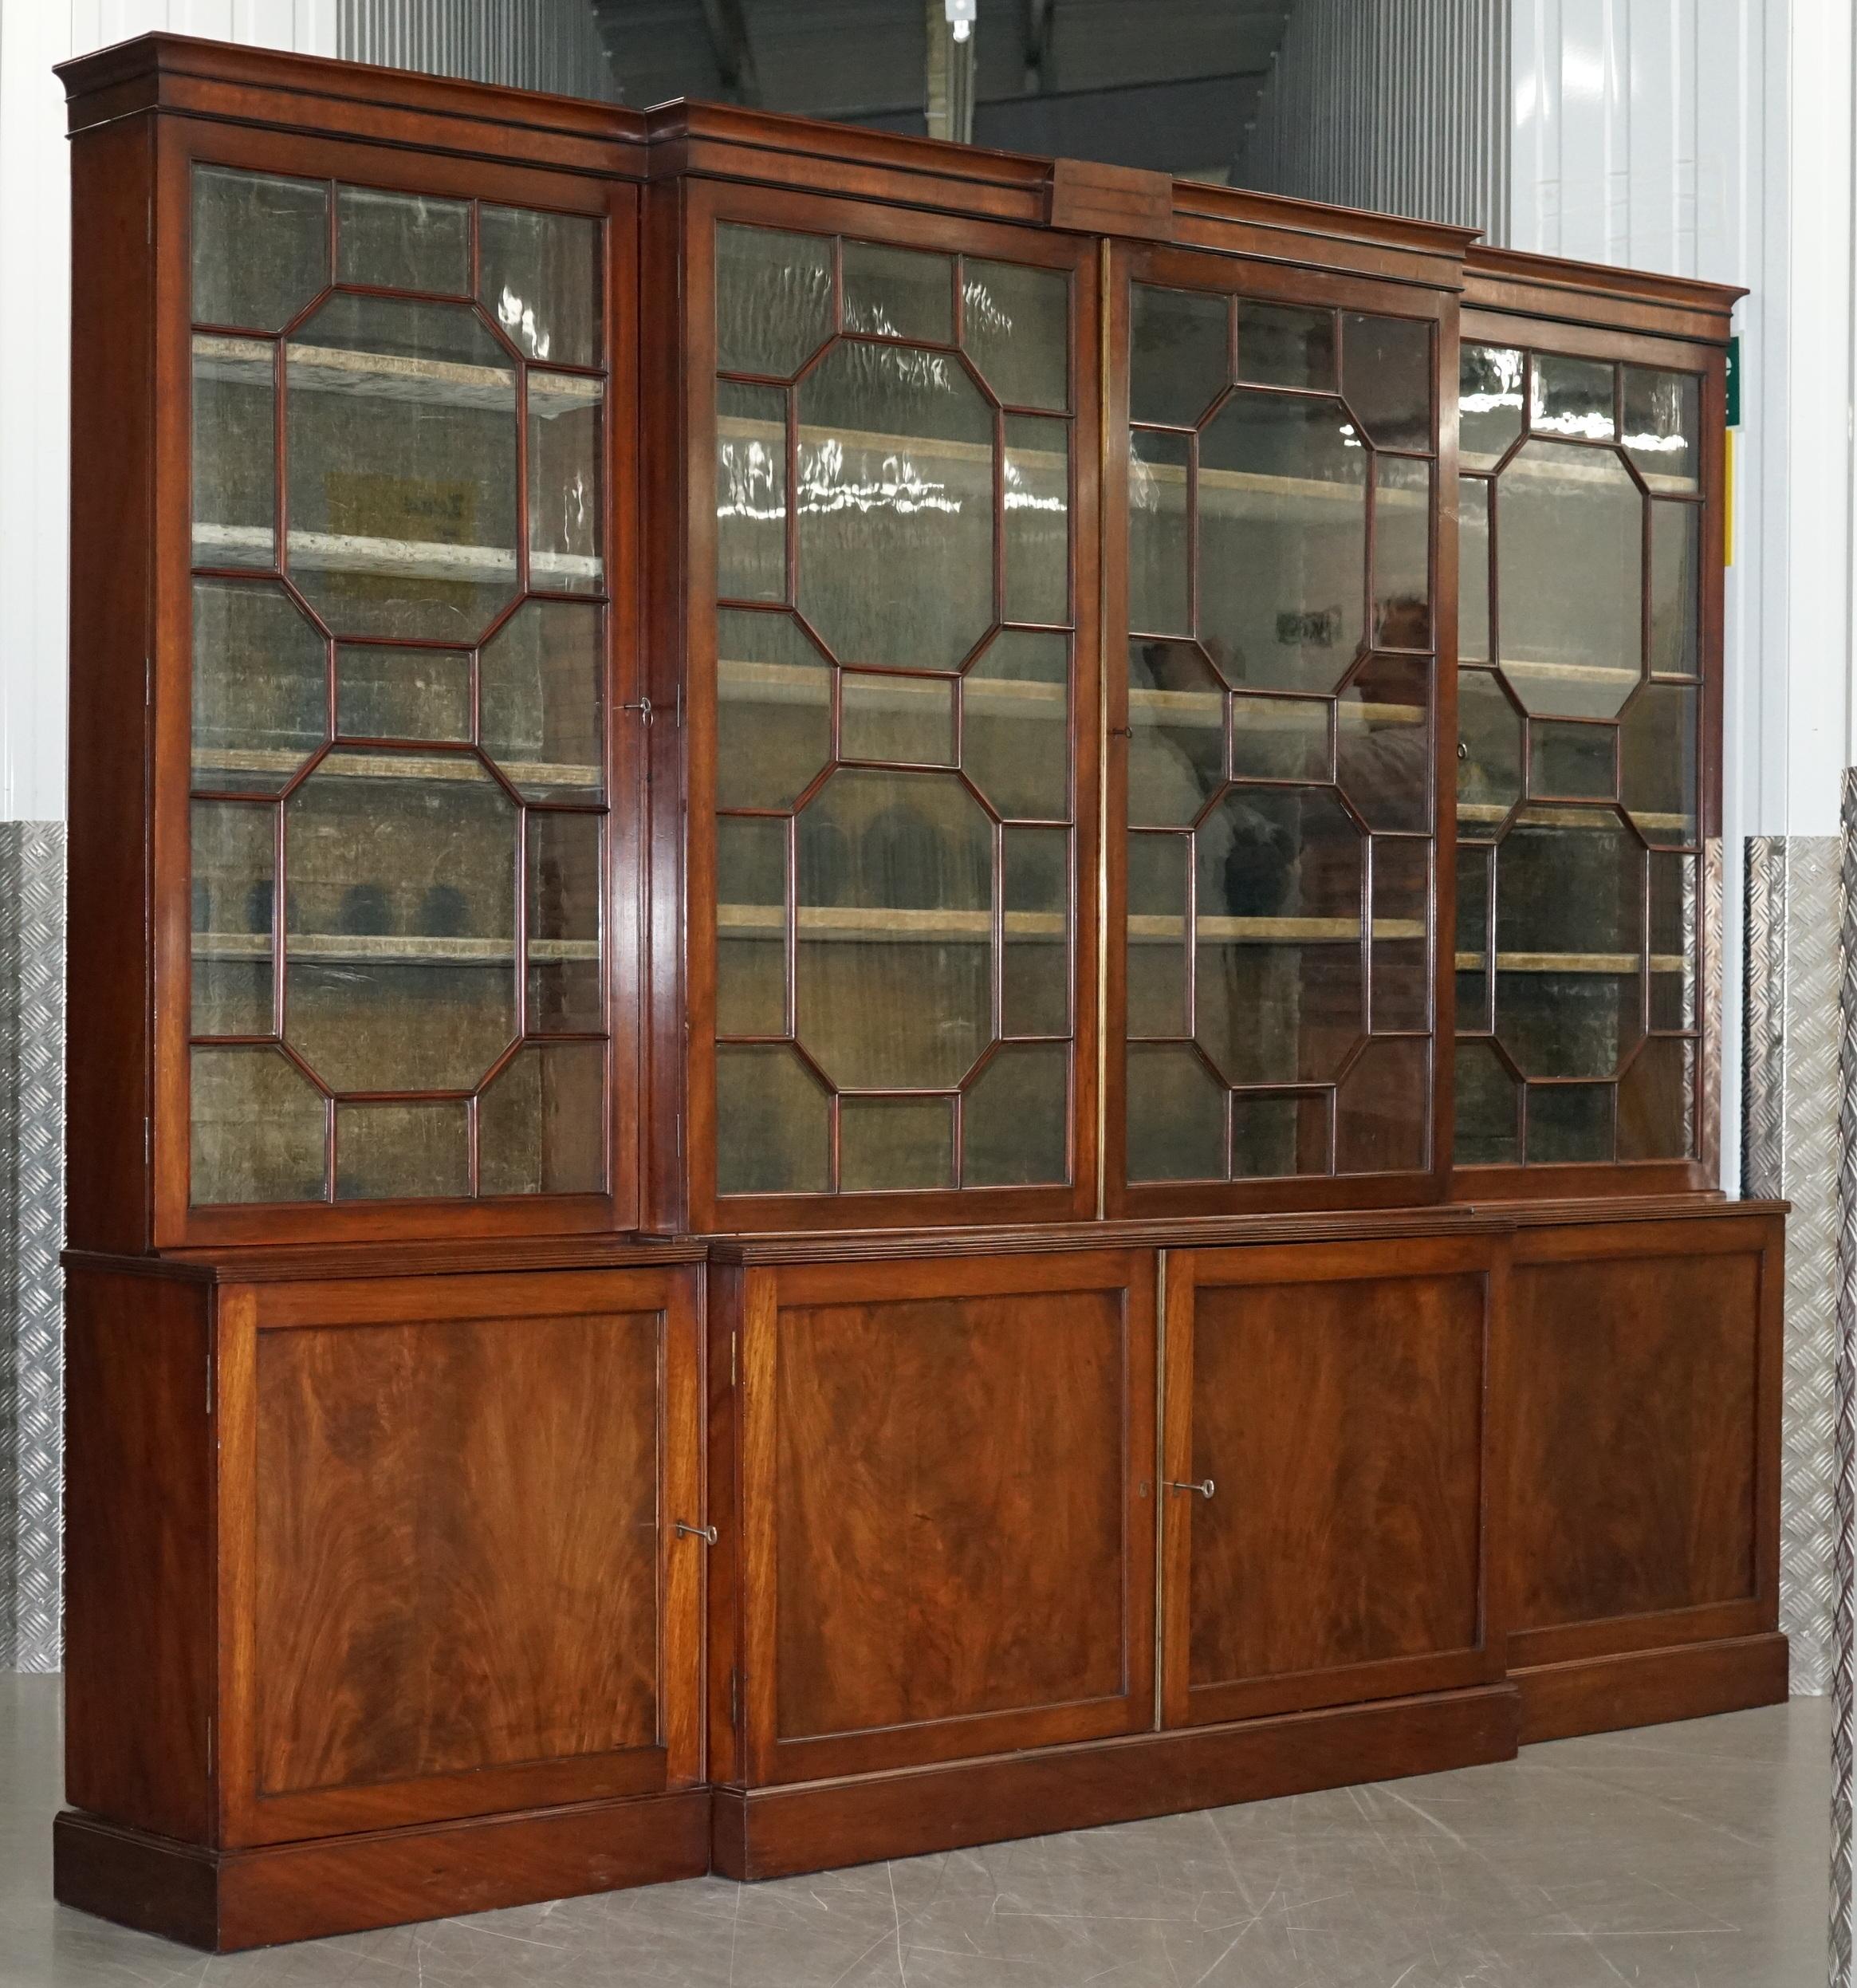 We are delighted to offer for sale this huge Regency circa 1820 Astral glazed flamed mahogany break front library bookcase or Pharmacy cabinet

This is a rare and desirable piece, its not often you come across quad bank astral glazed bookcases or